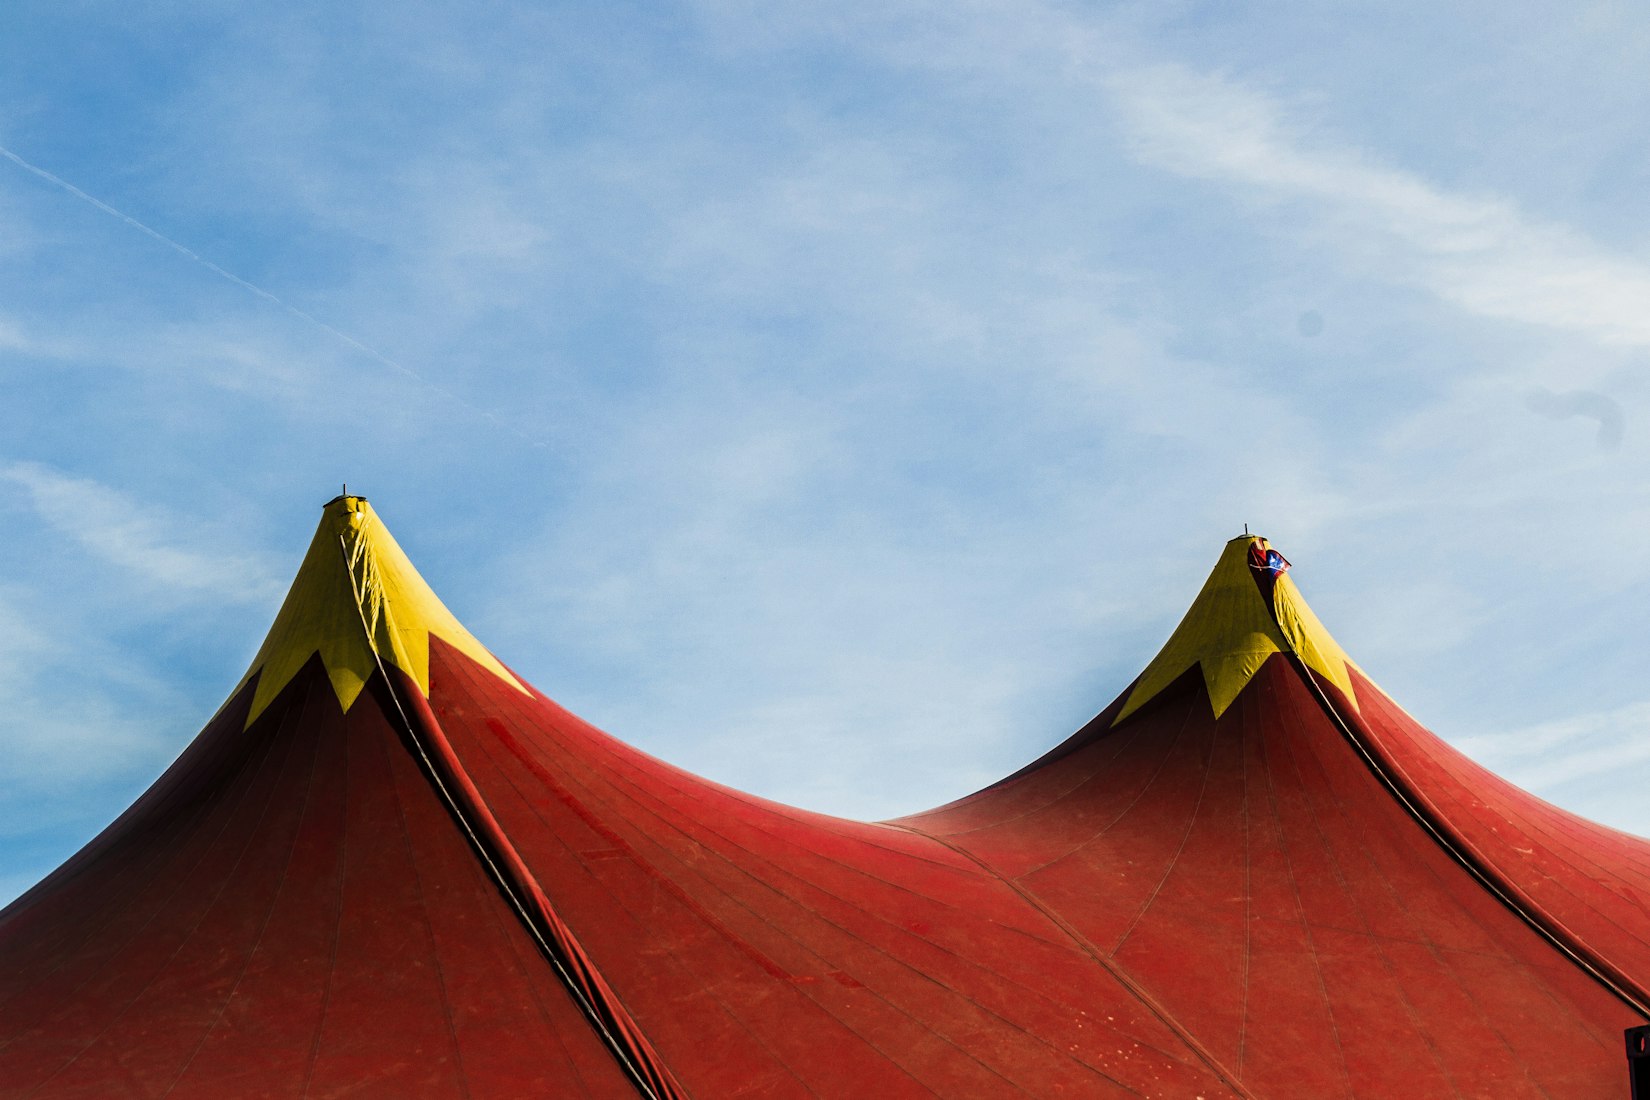 Top of Circus Tents